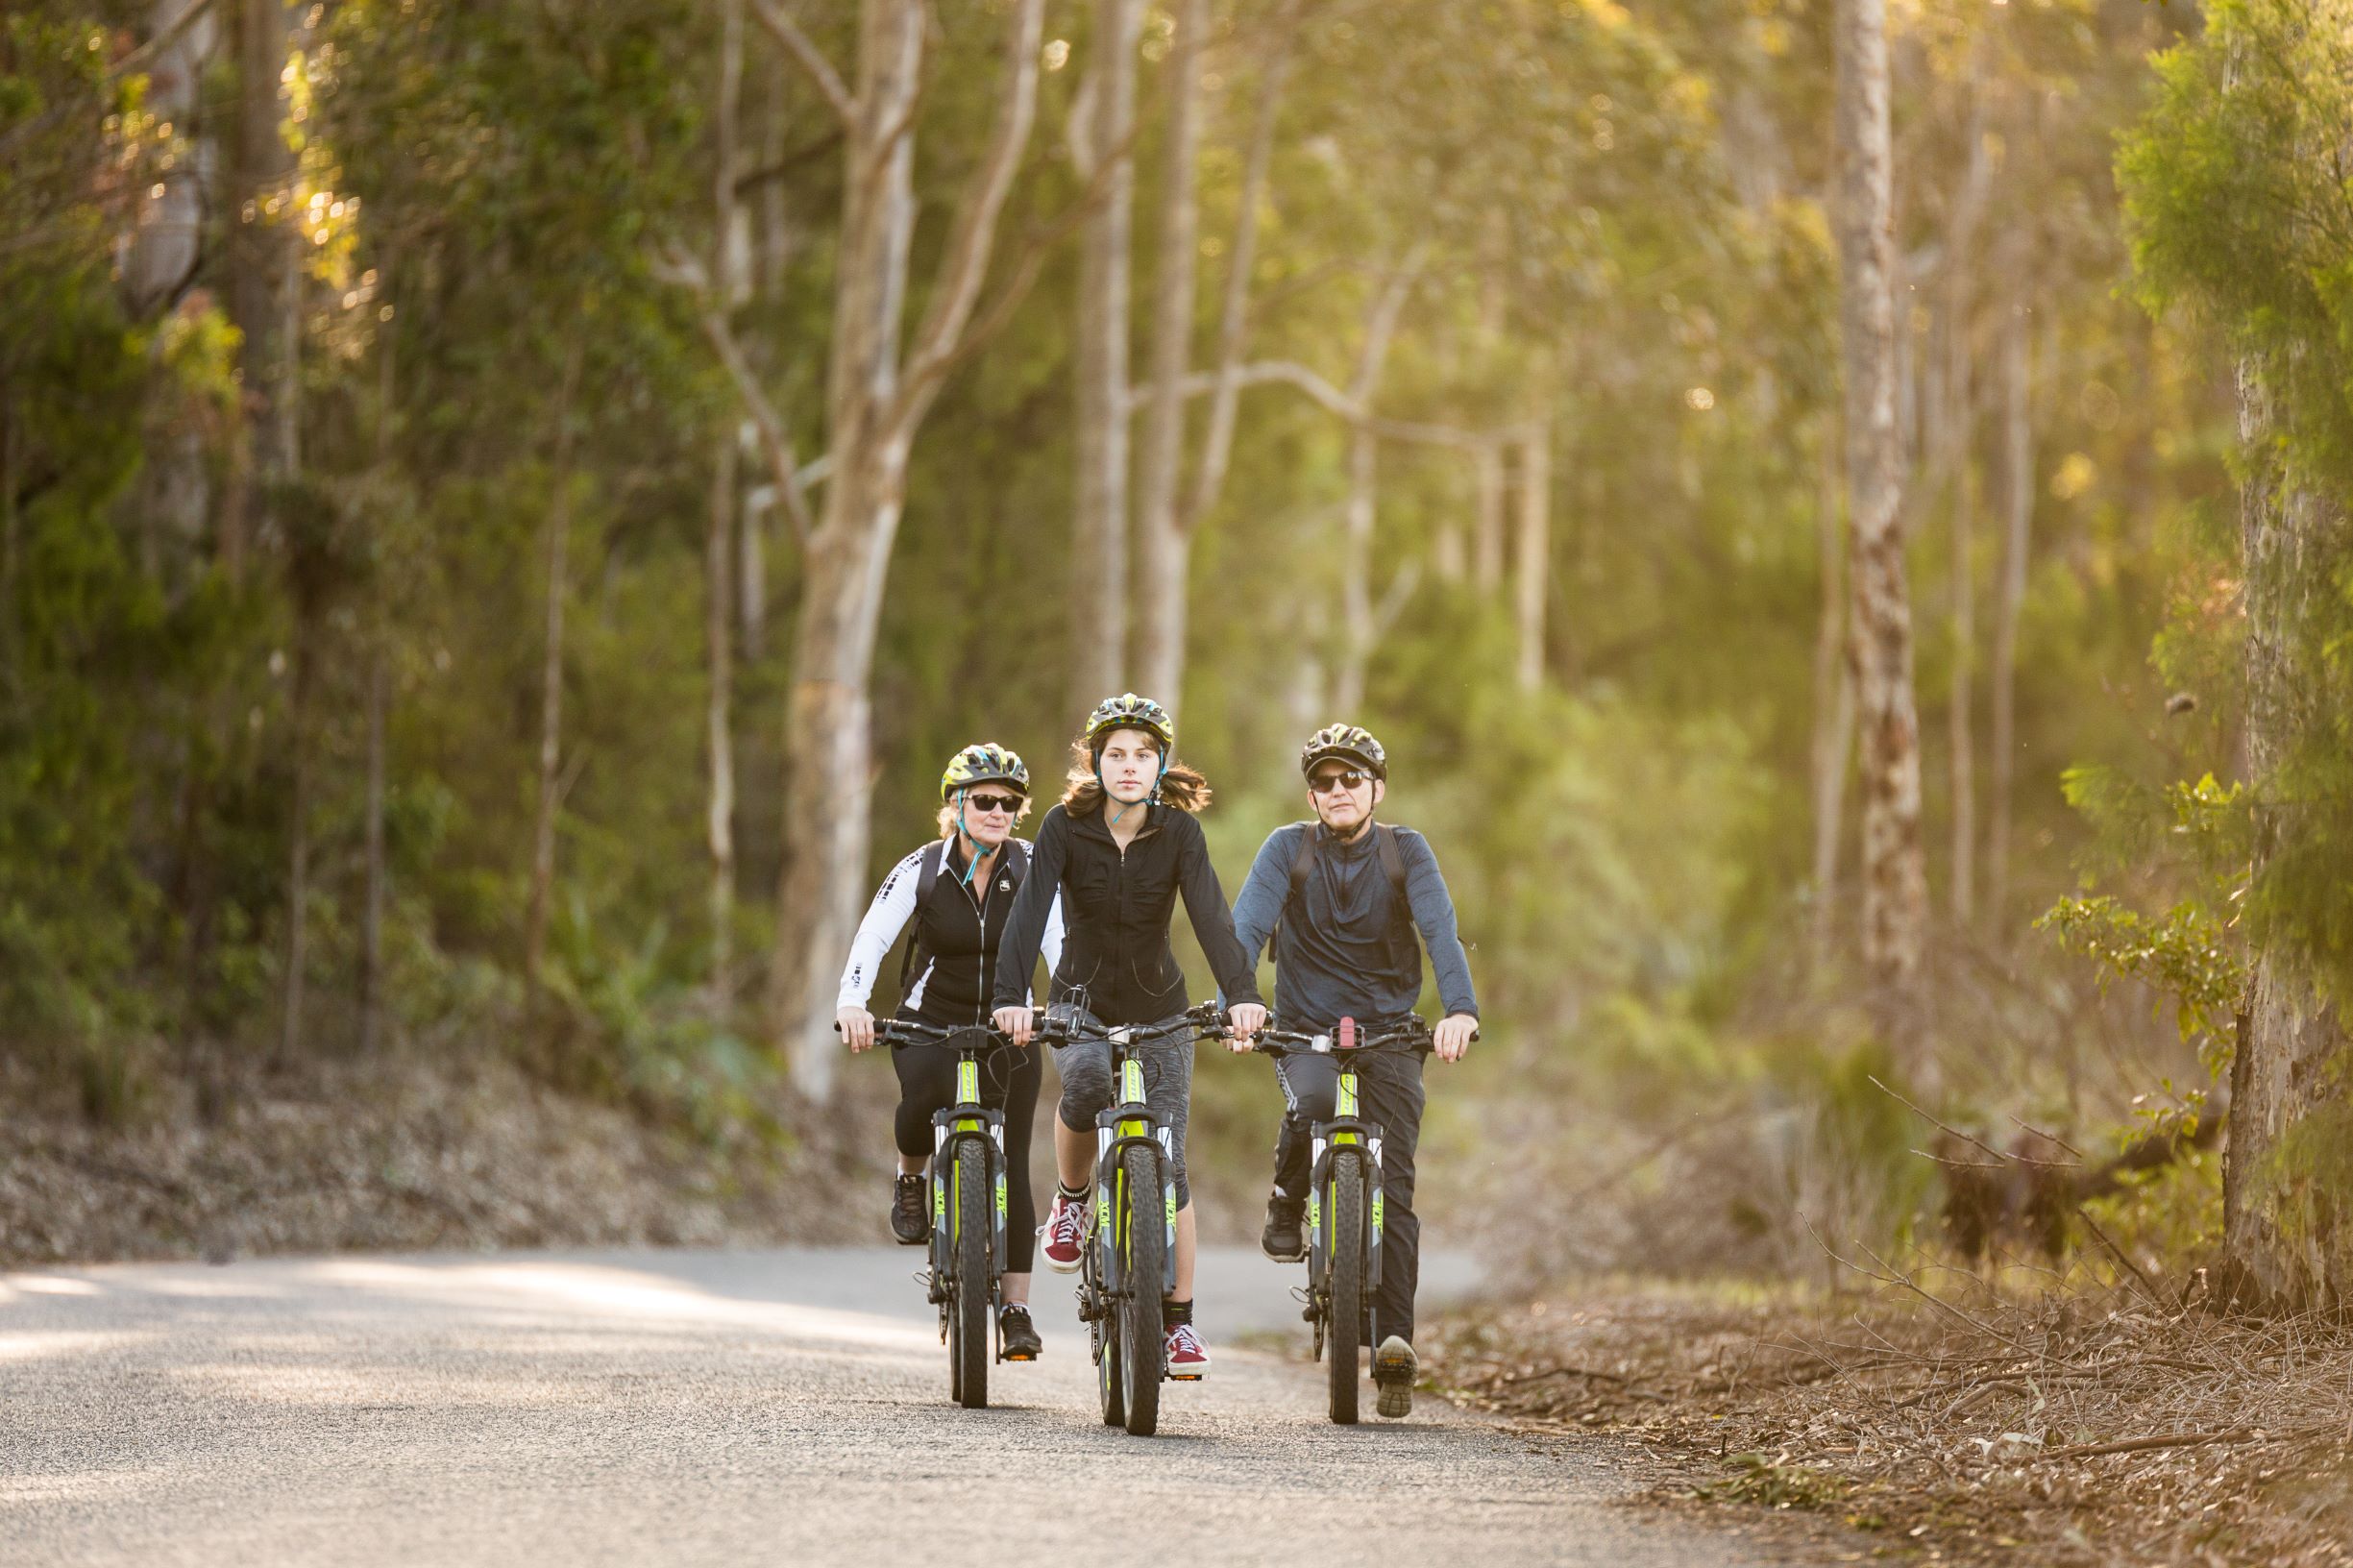 Discover Tilba by Electric Bike – 2 Day 2 Night Self Guided Cycle Tour – Departs and Returns from Narooma